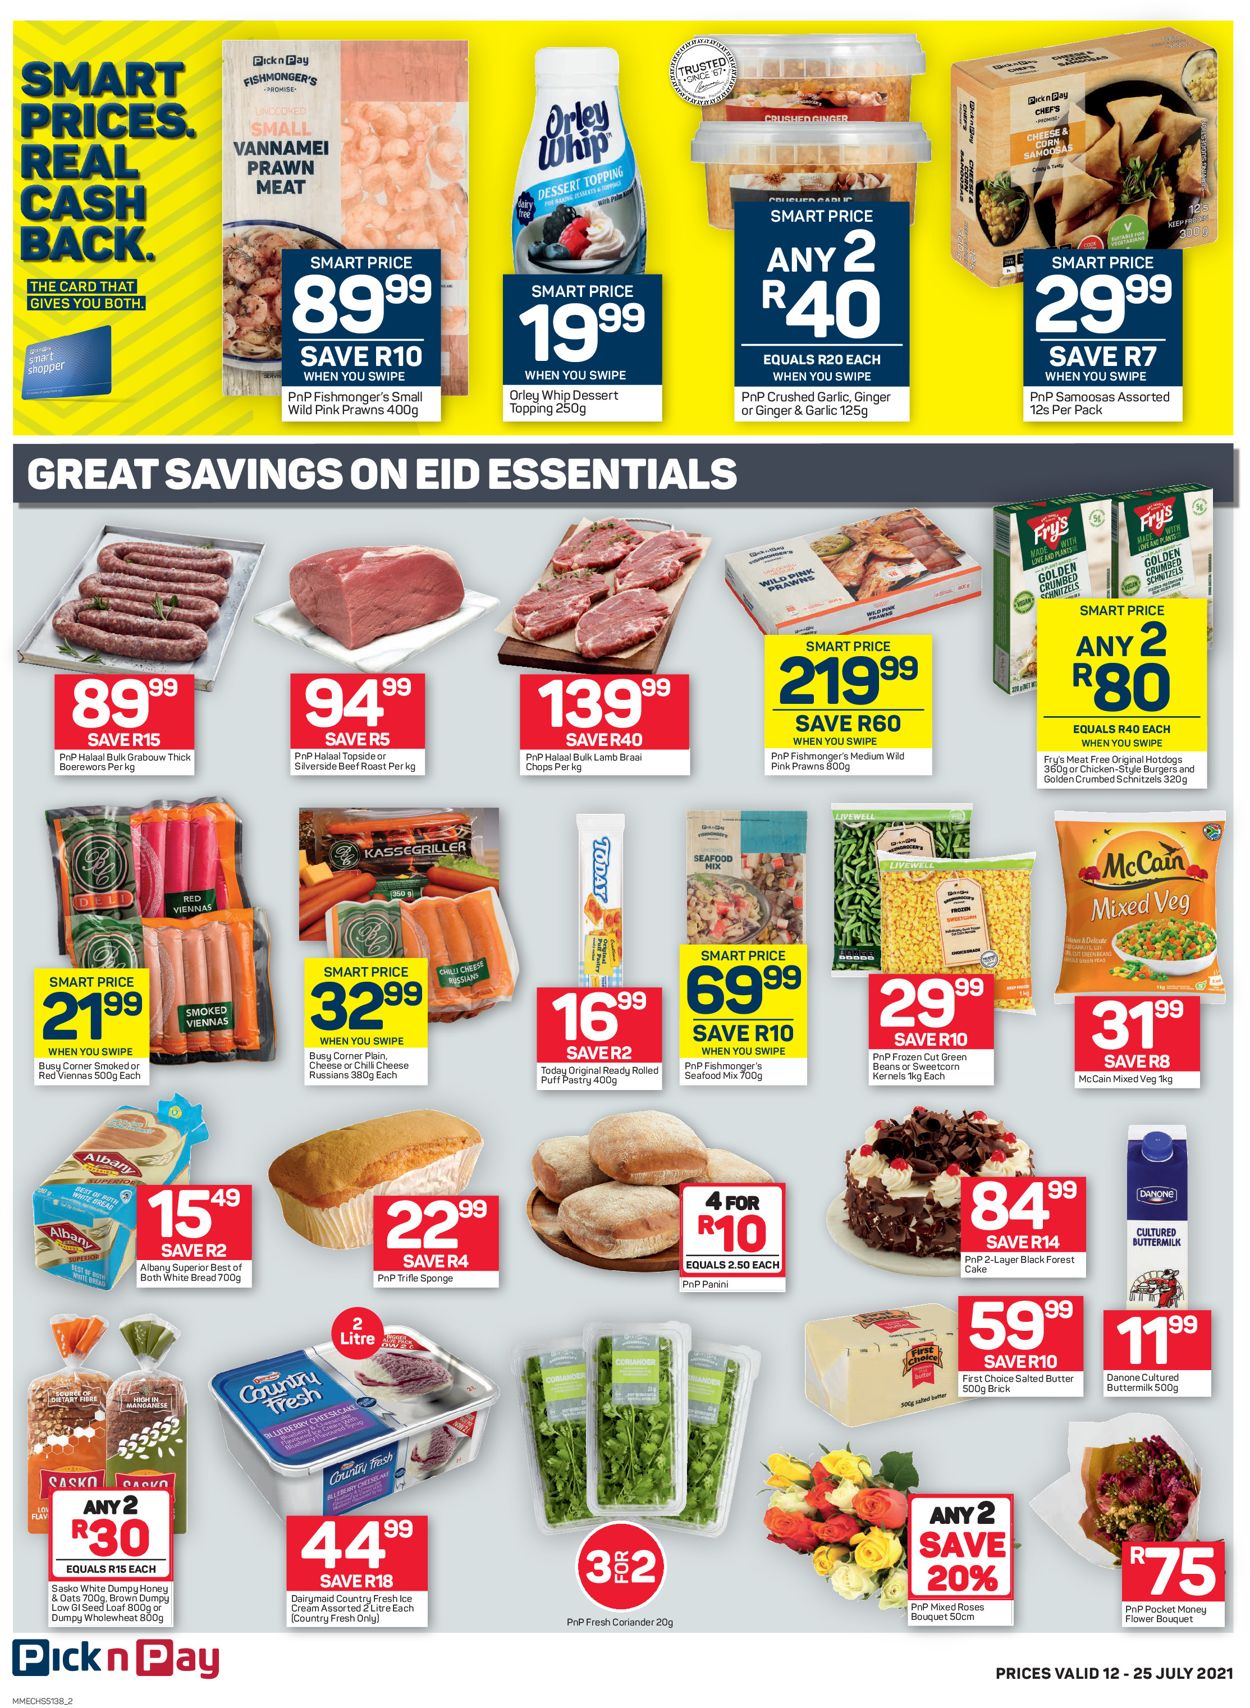 Pick n Pay Current catalogue 2021/07/12 - 2021/07/25 [2]